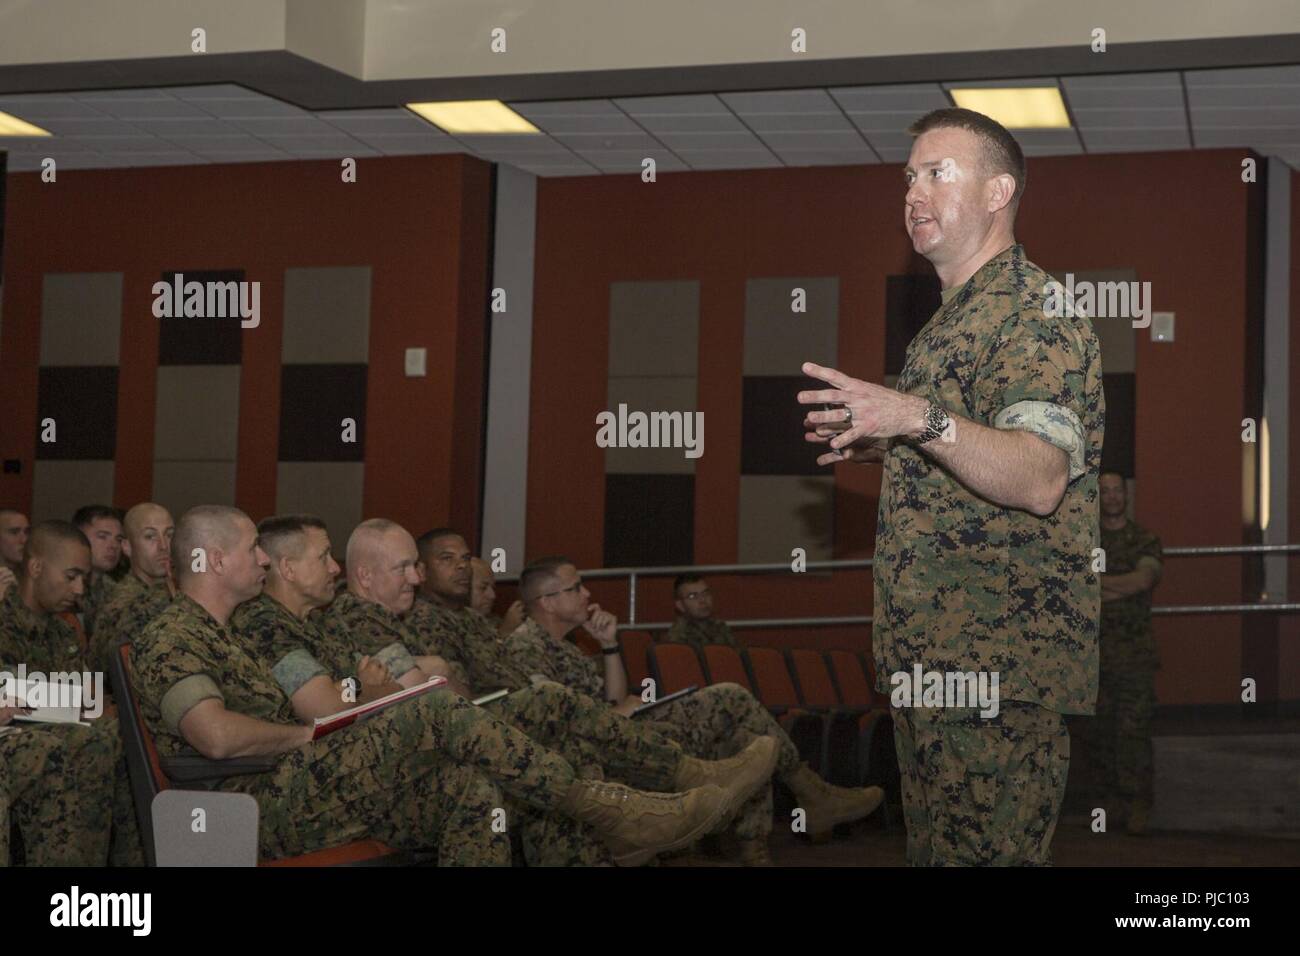 U.S. Marine Corps Lt. Col. Adam McCully, section head, Enlisted Assignment Branch, Manpower Management Division (MMEA), Headquarters Marine Corps, speaks to Marines about MMEA changes at Marine Corps Base Camp Pendleton, California, July 19, 2018. In Fiscal Year 2019, special duty assignments will be shortened down to drill instructor, recruiter and Marine Security Guard. Stock Photo